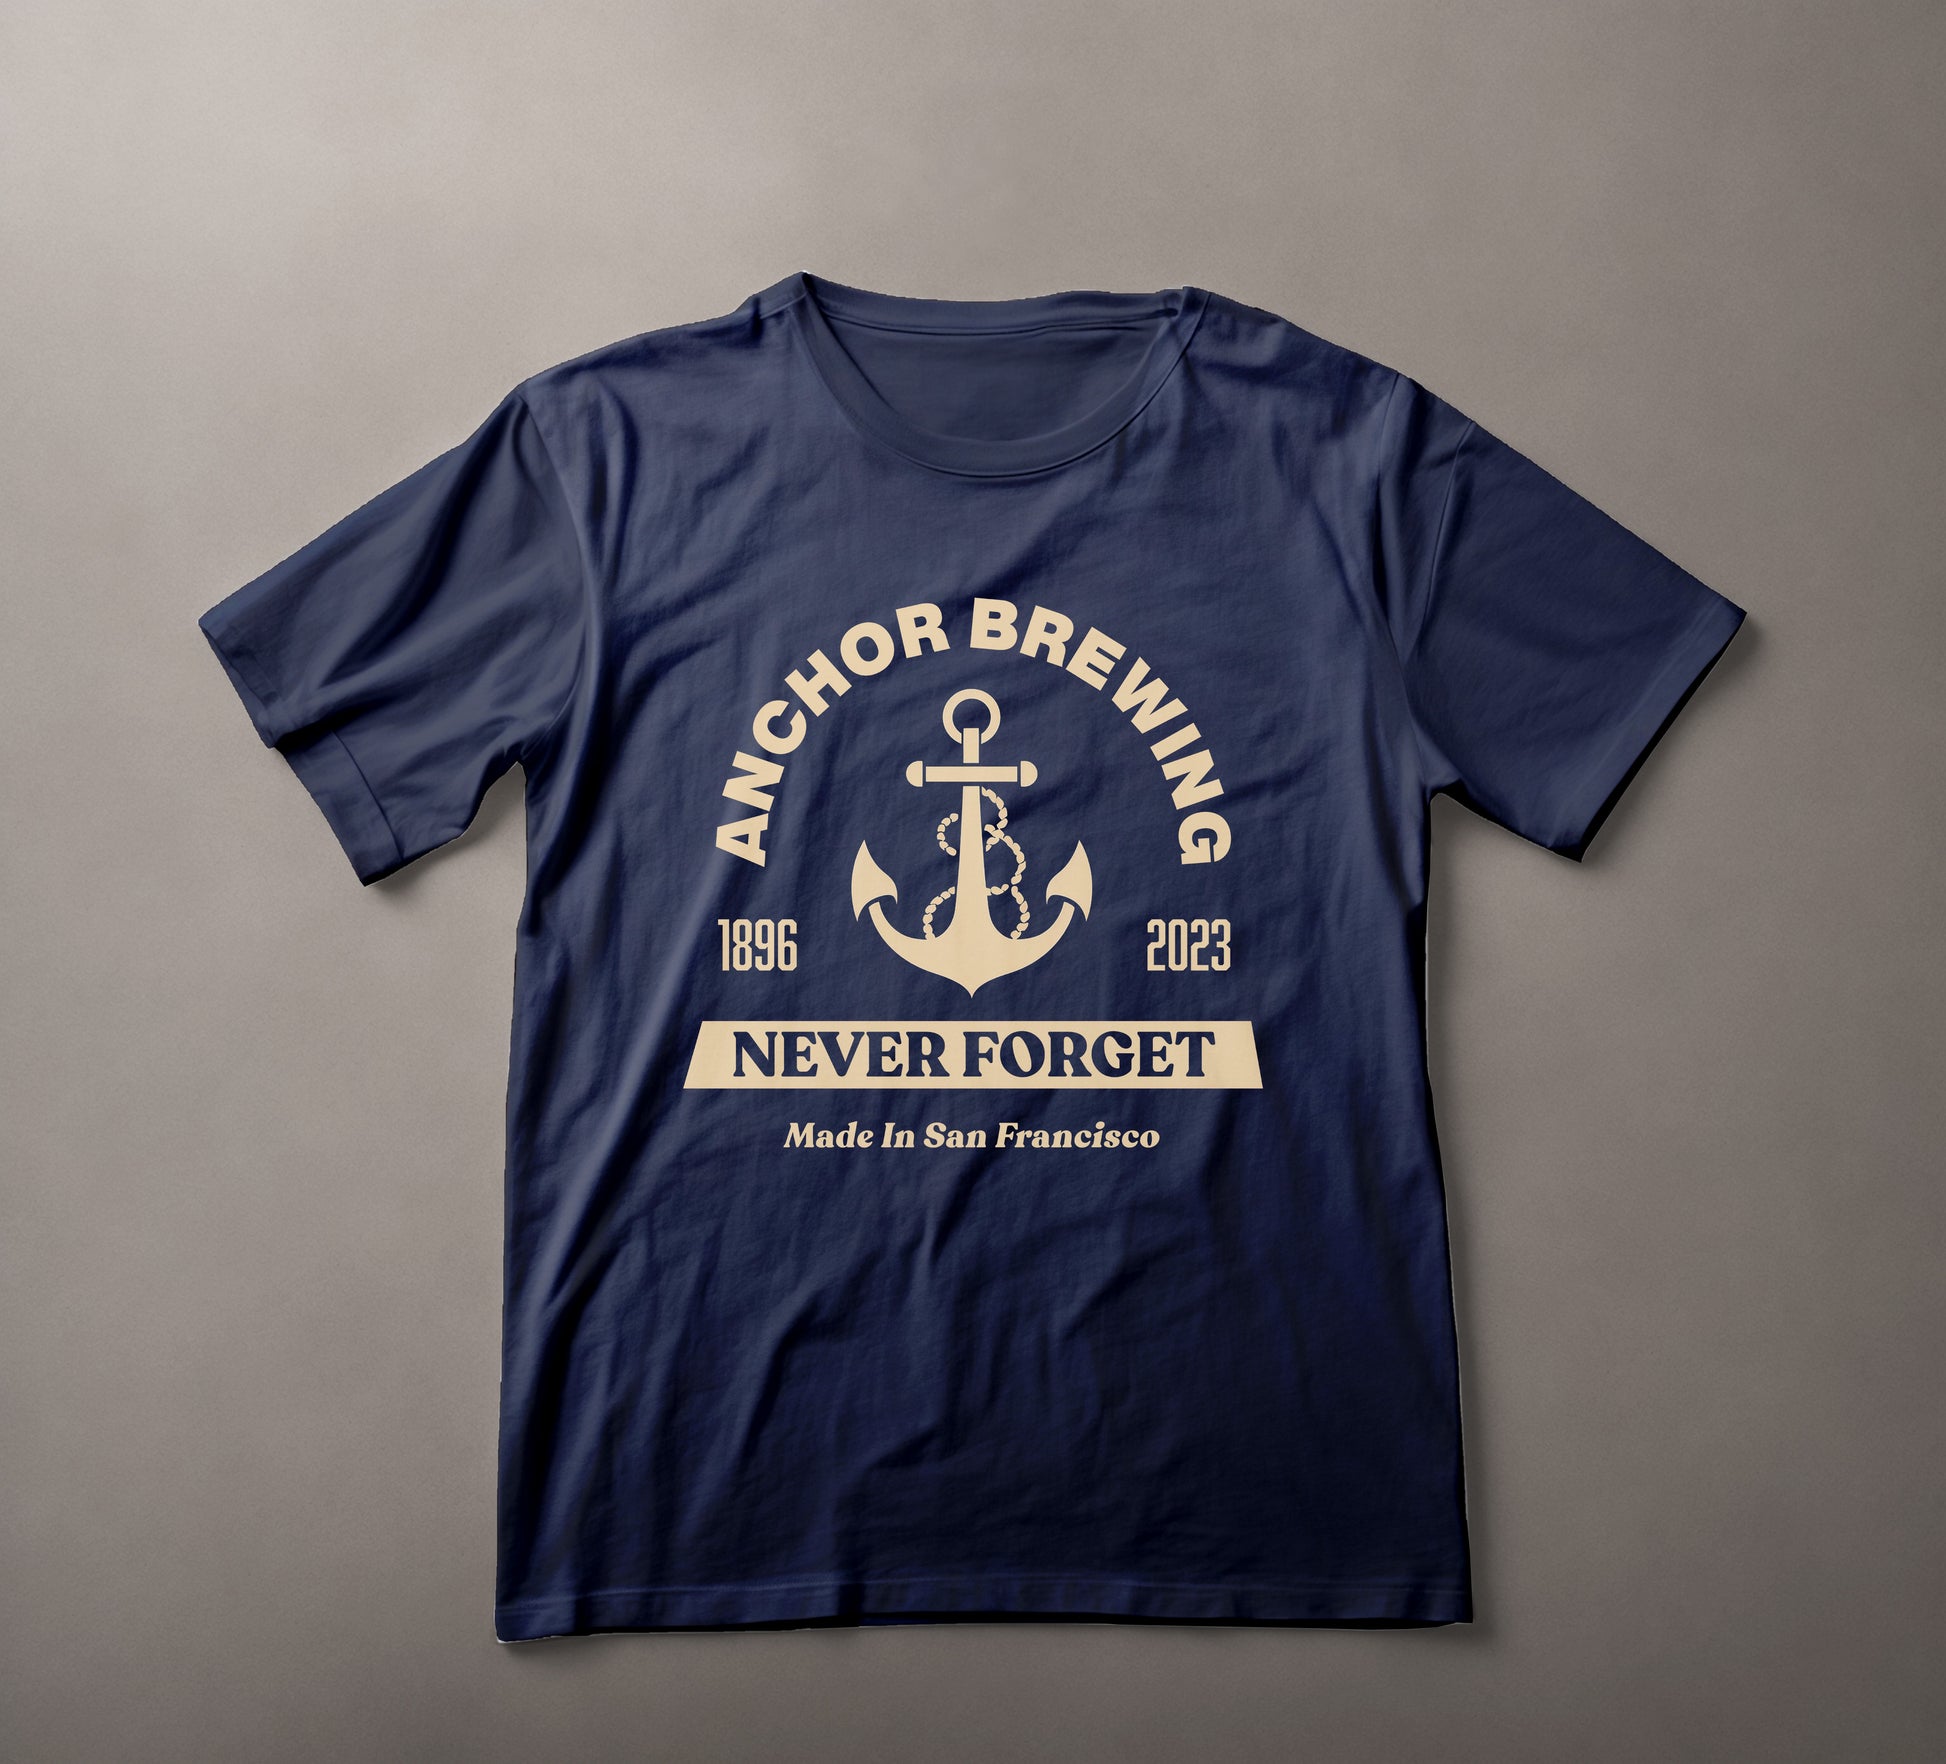 Vintage Brewery T-shirt, Anchor Brewing Apparel, San Francisco Heritage Tee, Commemorative Brewery Shirt, Craft Beer Enthusiast Clothing, 1896 Historic Anchor Design, Nautical Brewery Wear, Never Forget Anchor Tee, Brewing History Fashion, San Francisco Brewery Souvenir